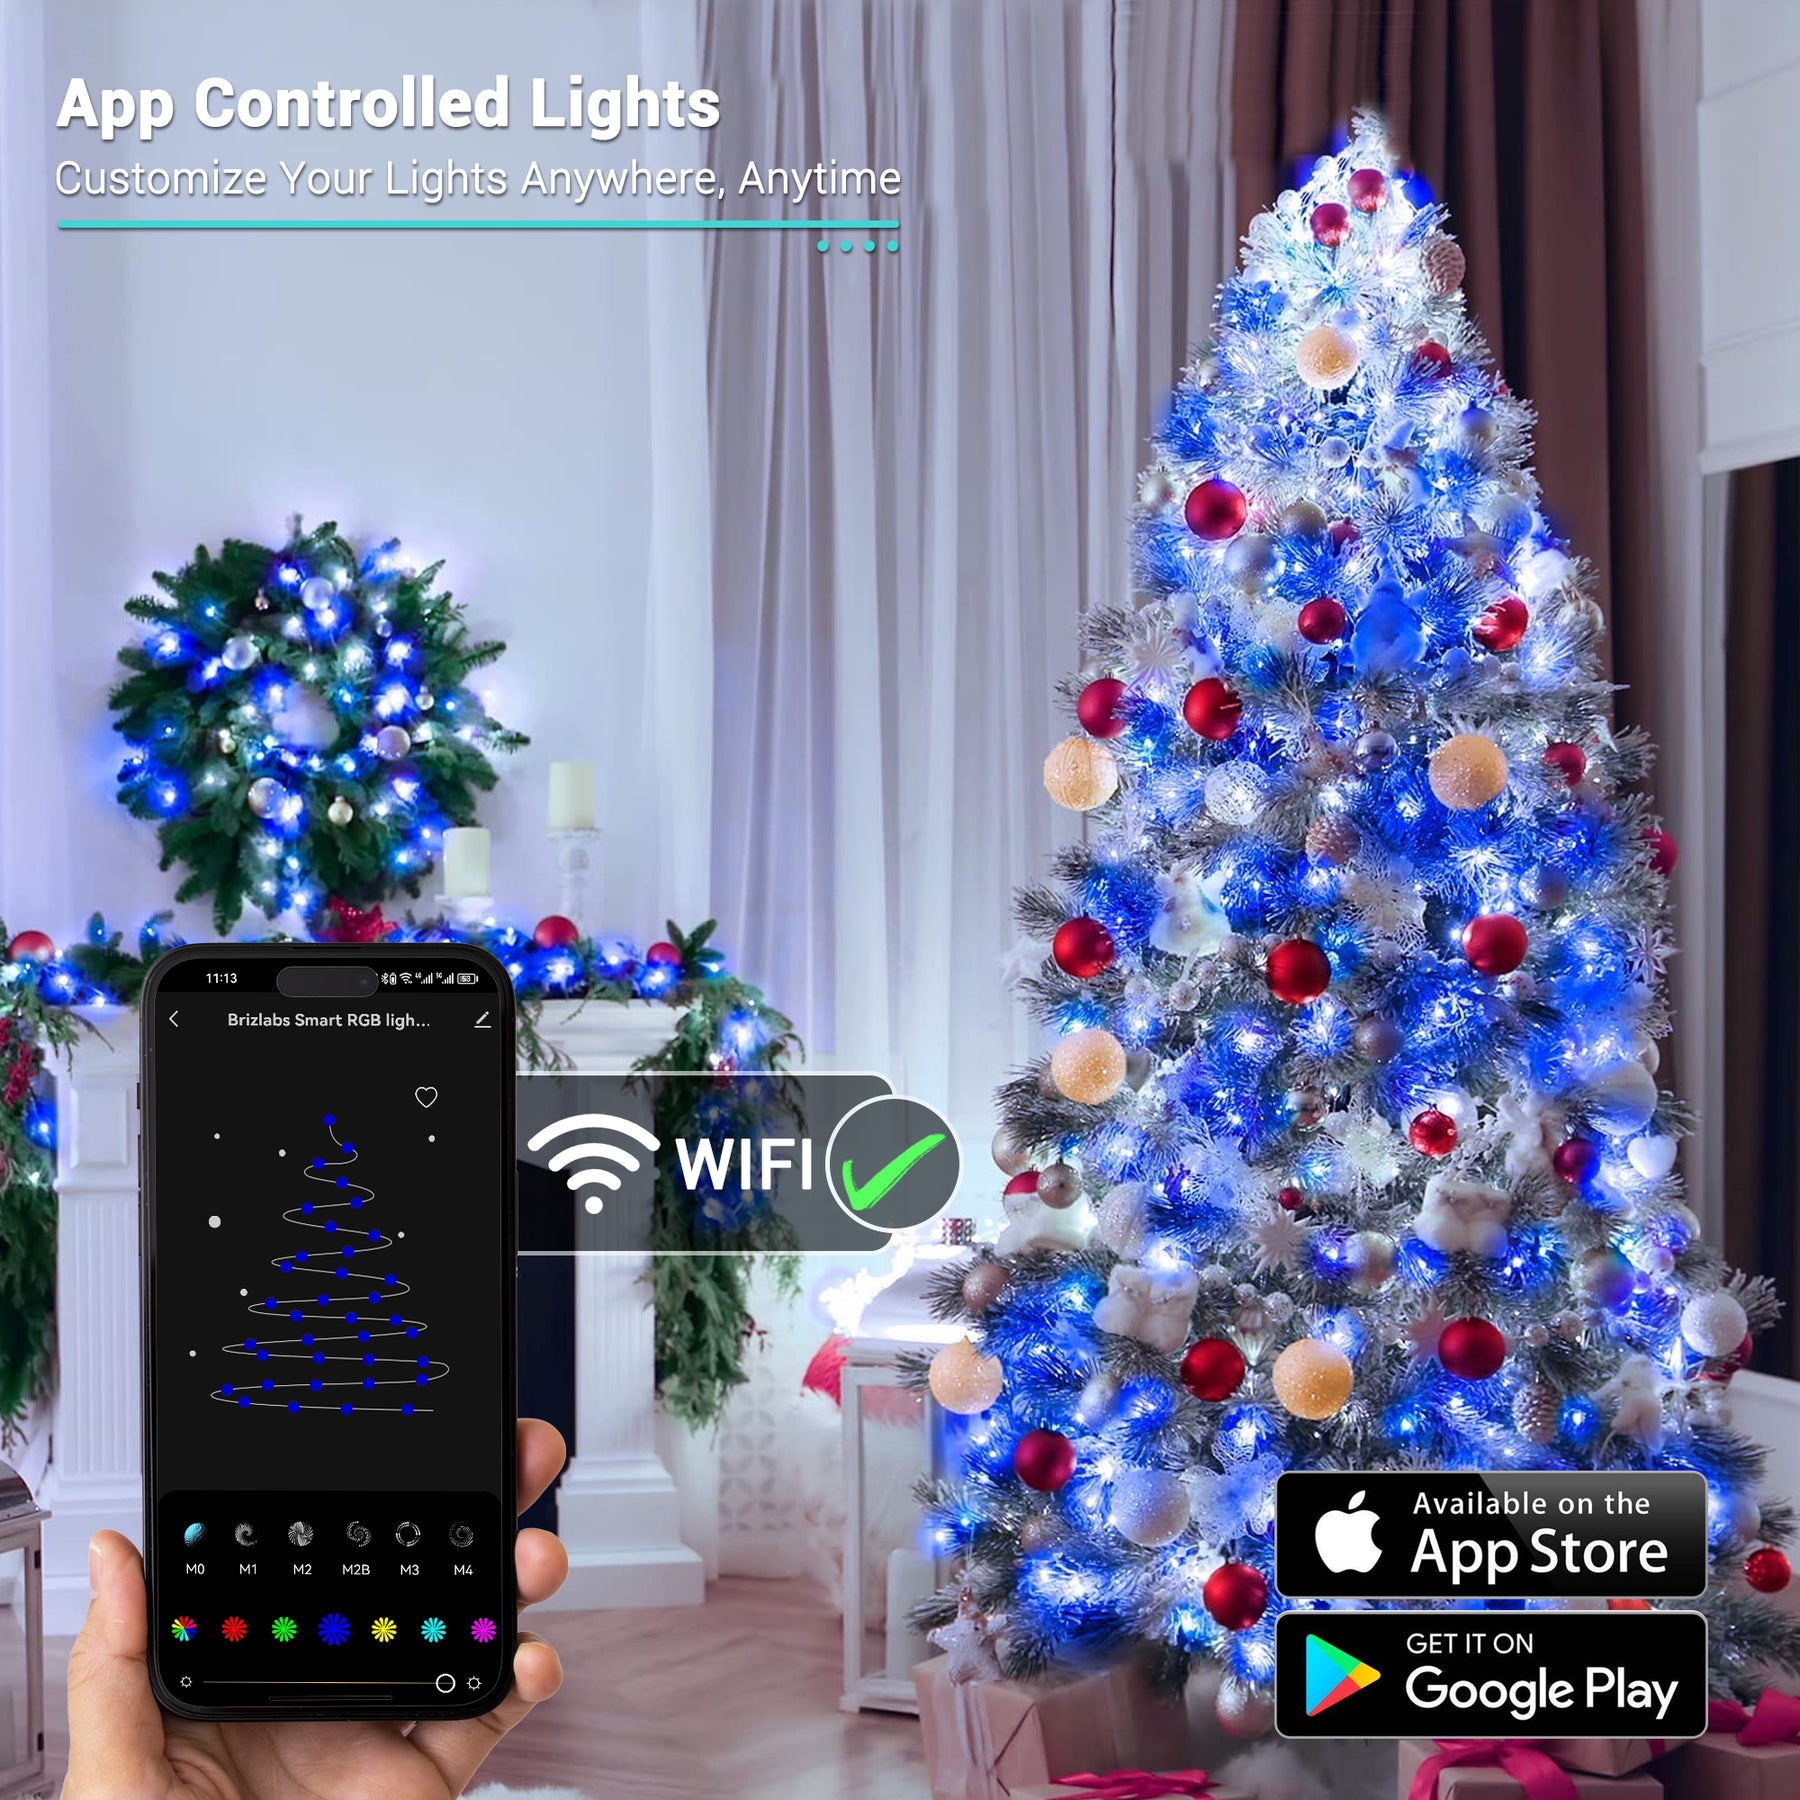 Smart String Lights, 196ft 600 LED Smart WiFi Color Changing Fairy Lights App Controlled, RGB Christmas Lights Clear Wire Work with Alexa & Google Home for Halloween Indoor Outdoor Tree Decor